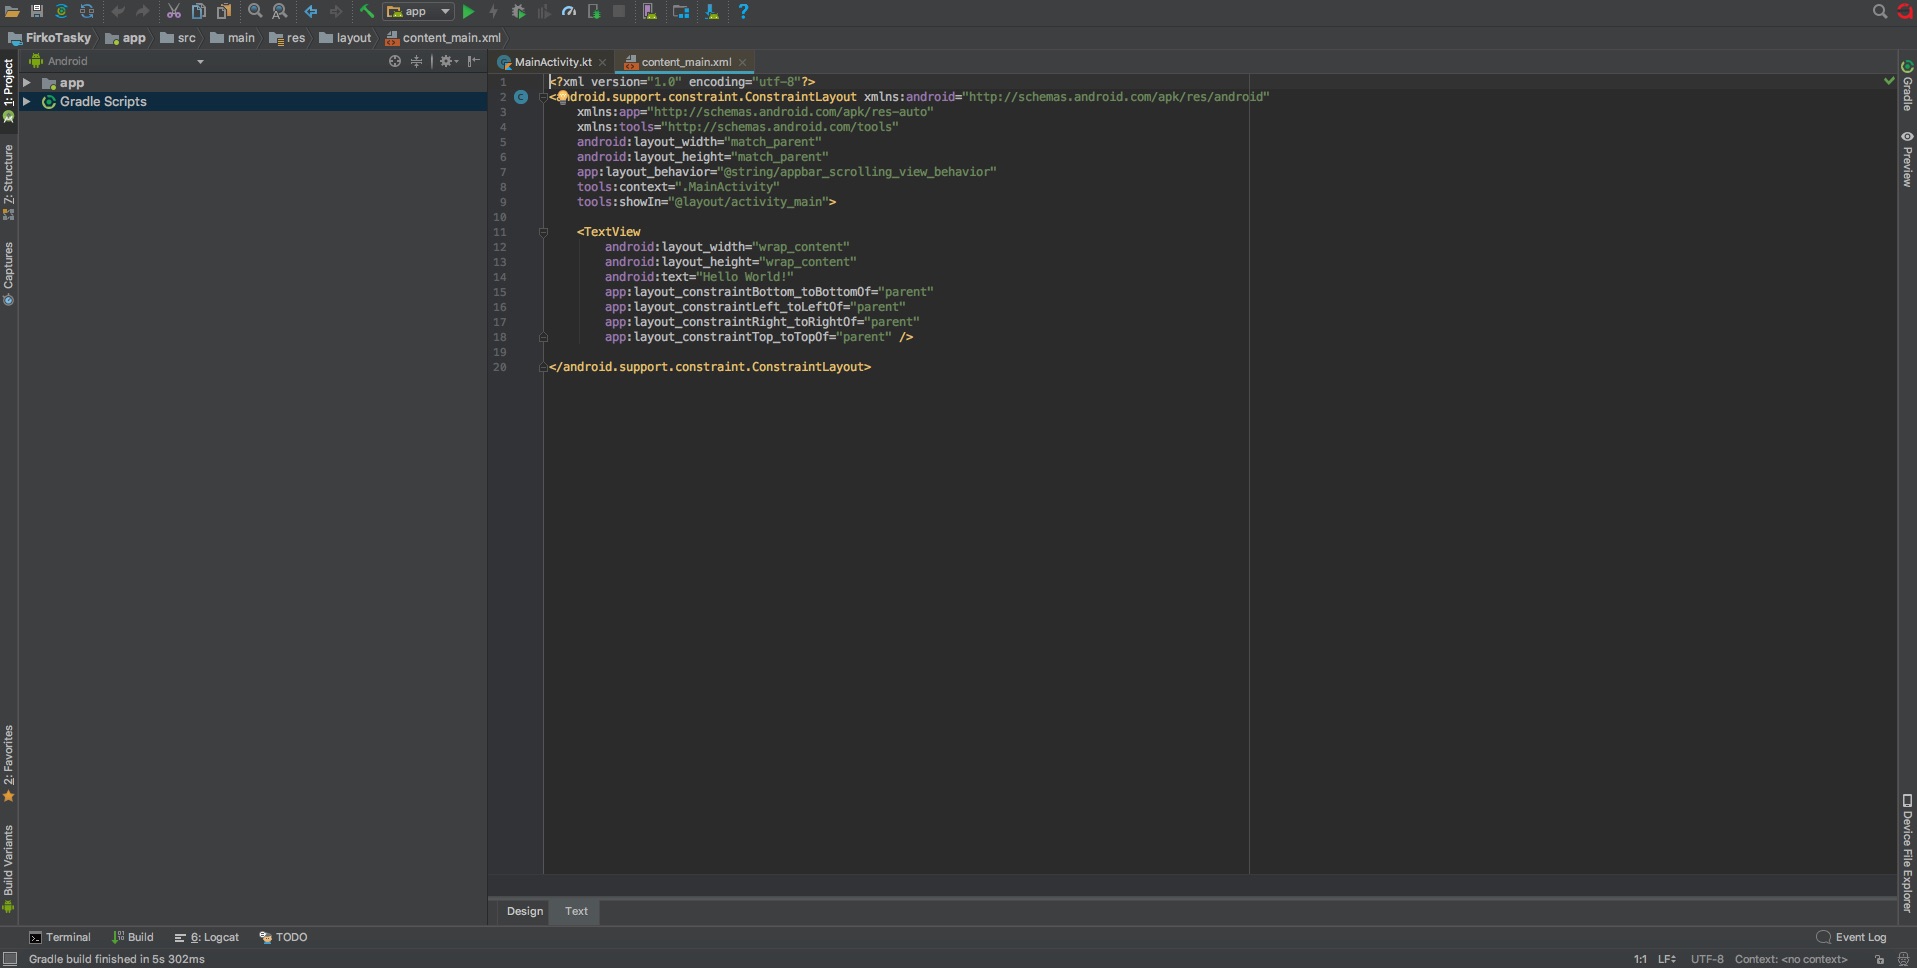 FirkoTasky-Android Studio Workspace-After Creating Project